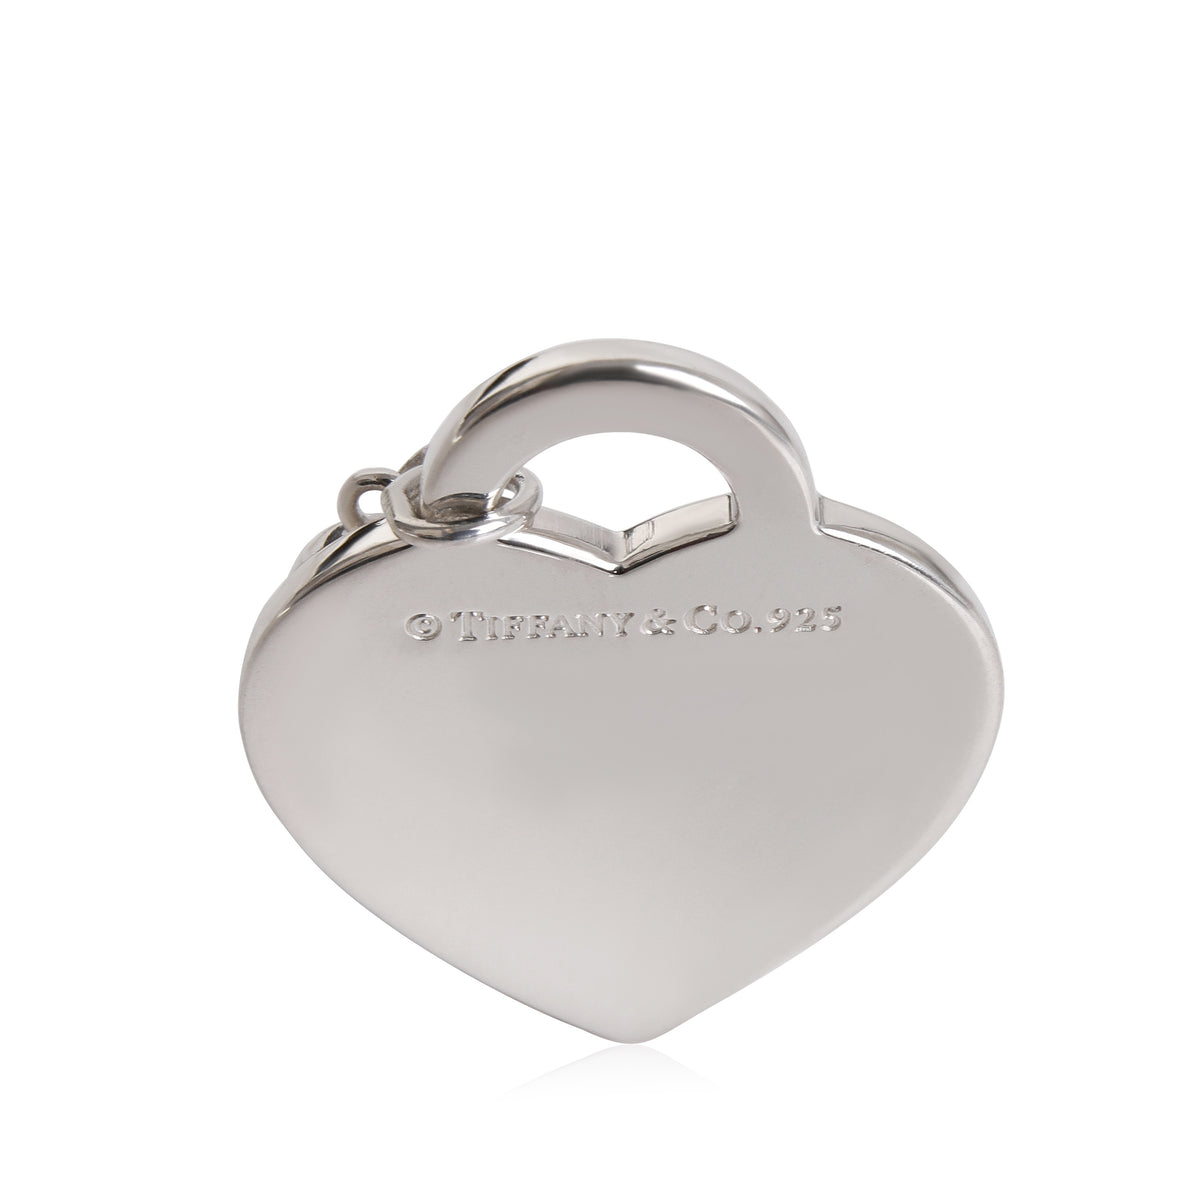 Tiffany & Co. Return To Tiffany Heart Tag Charms in Sterling Silver